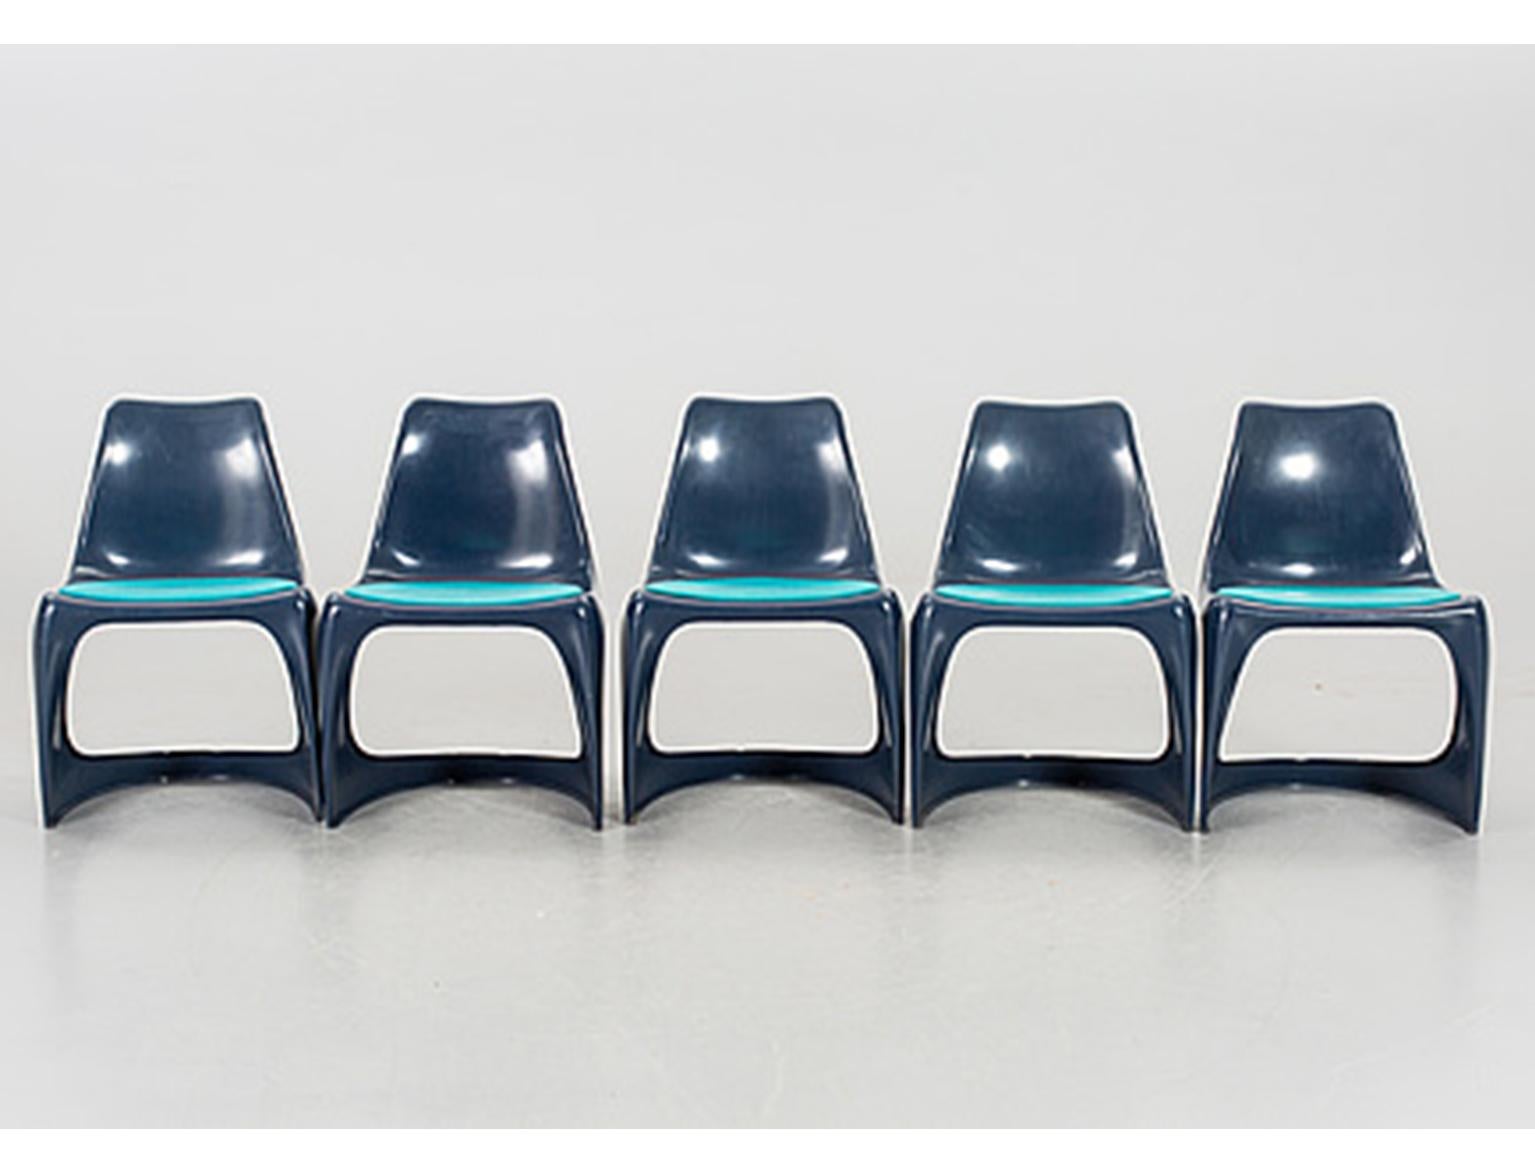 Color Beat, Cado, Five Stacking Chairs, 1970s Denmark, by Sten Østergaard For Sale 2